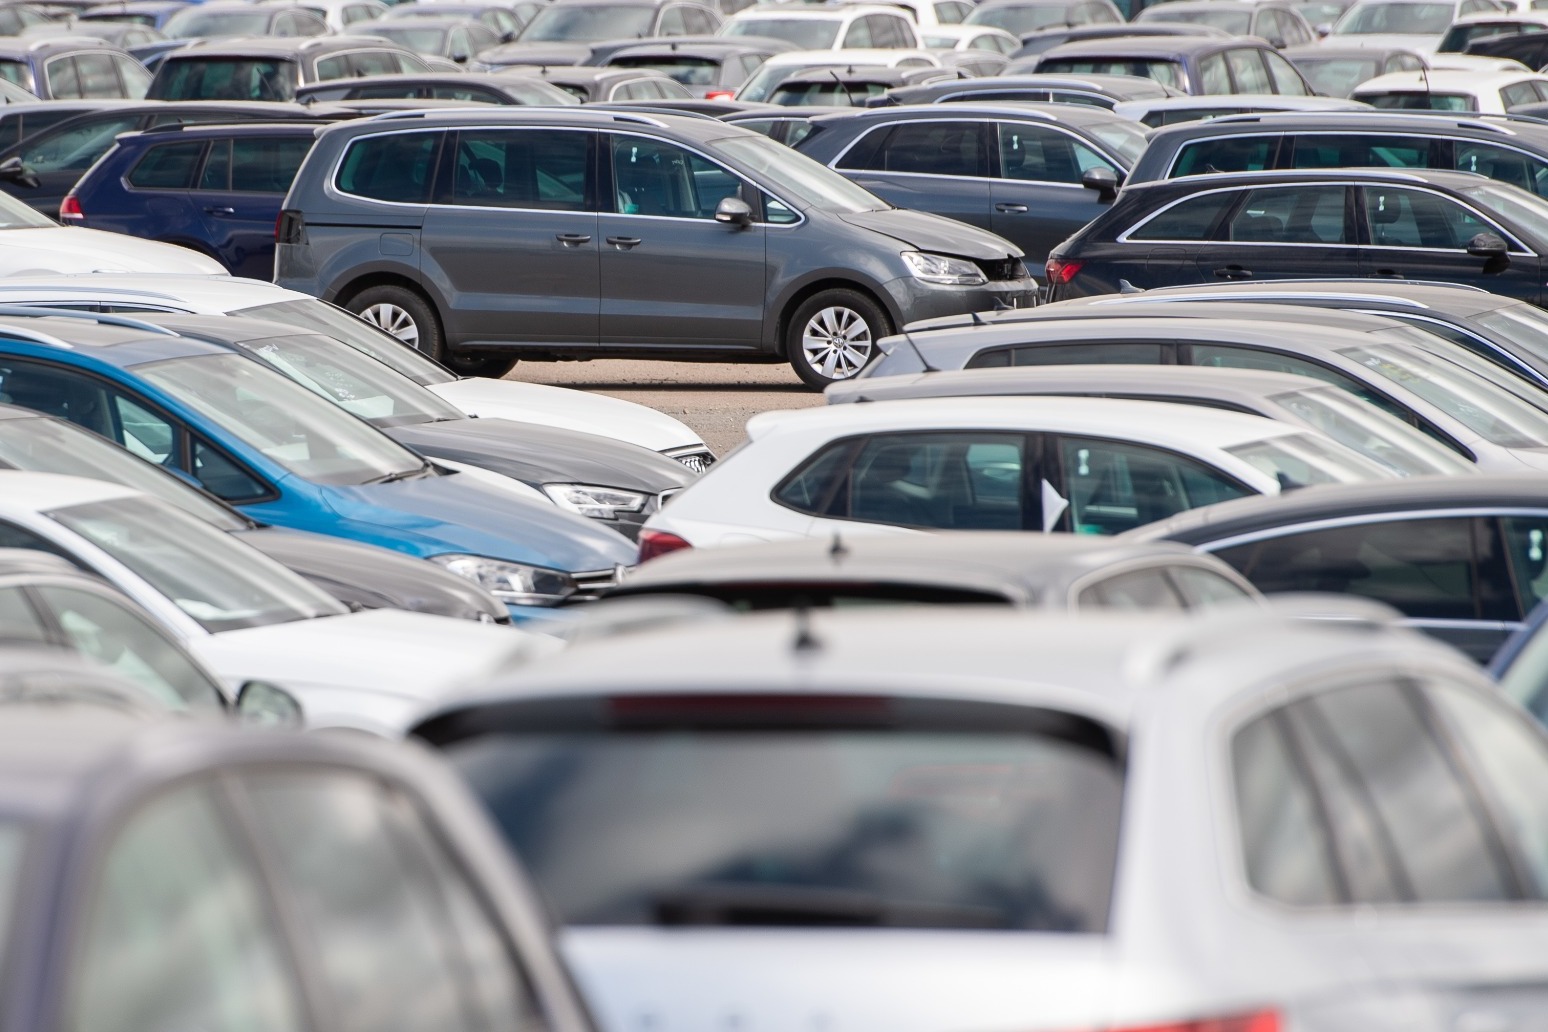 Used car market slumped by 8.5% in 2022 